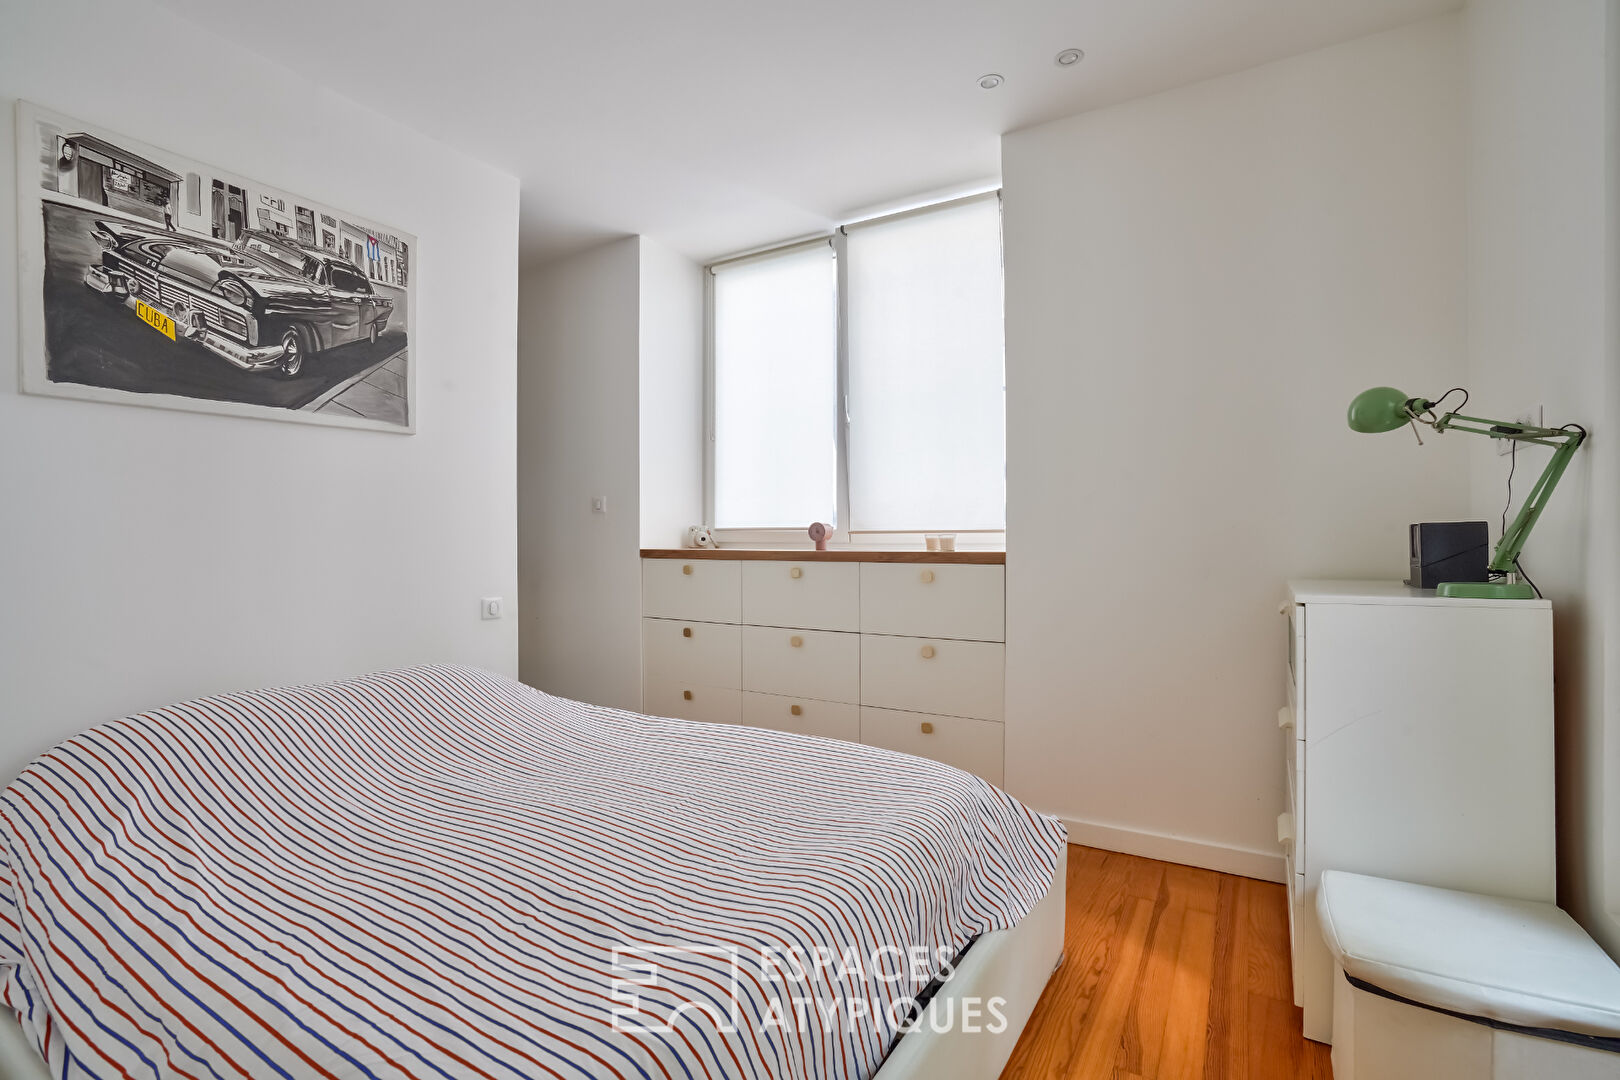 Beautifully renovated duplex with terrace